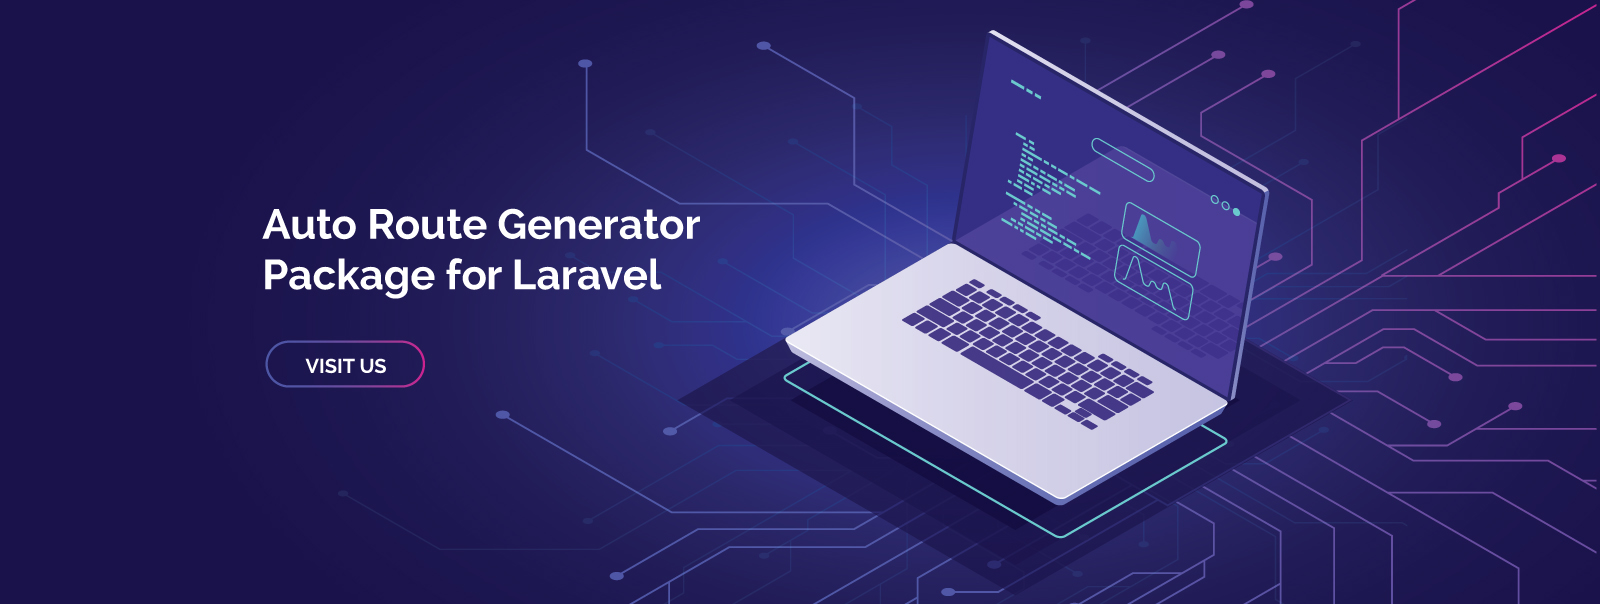 Auto Route Generator Package for Laravel cover image